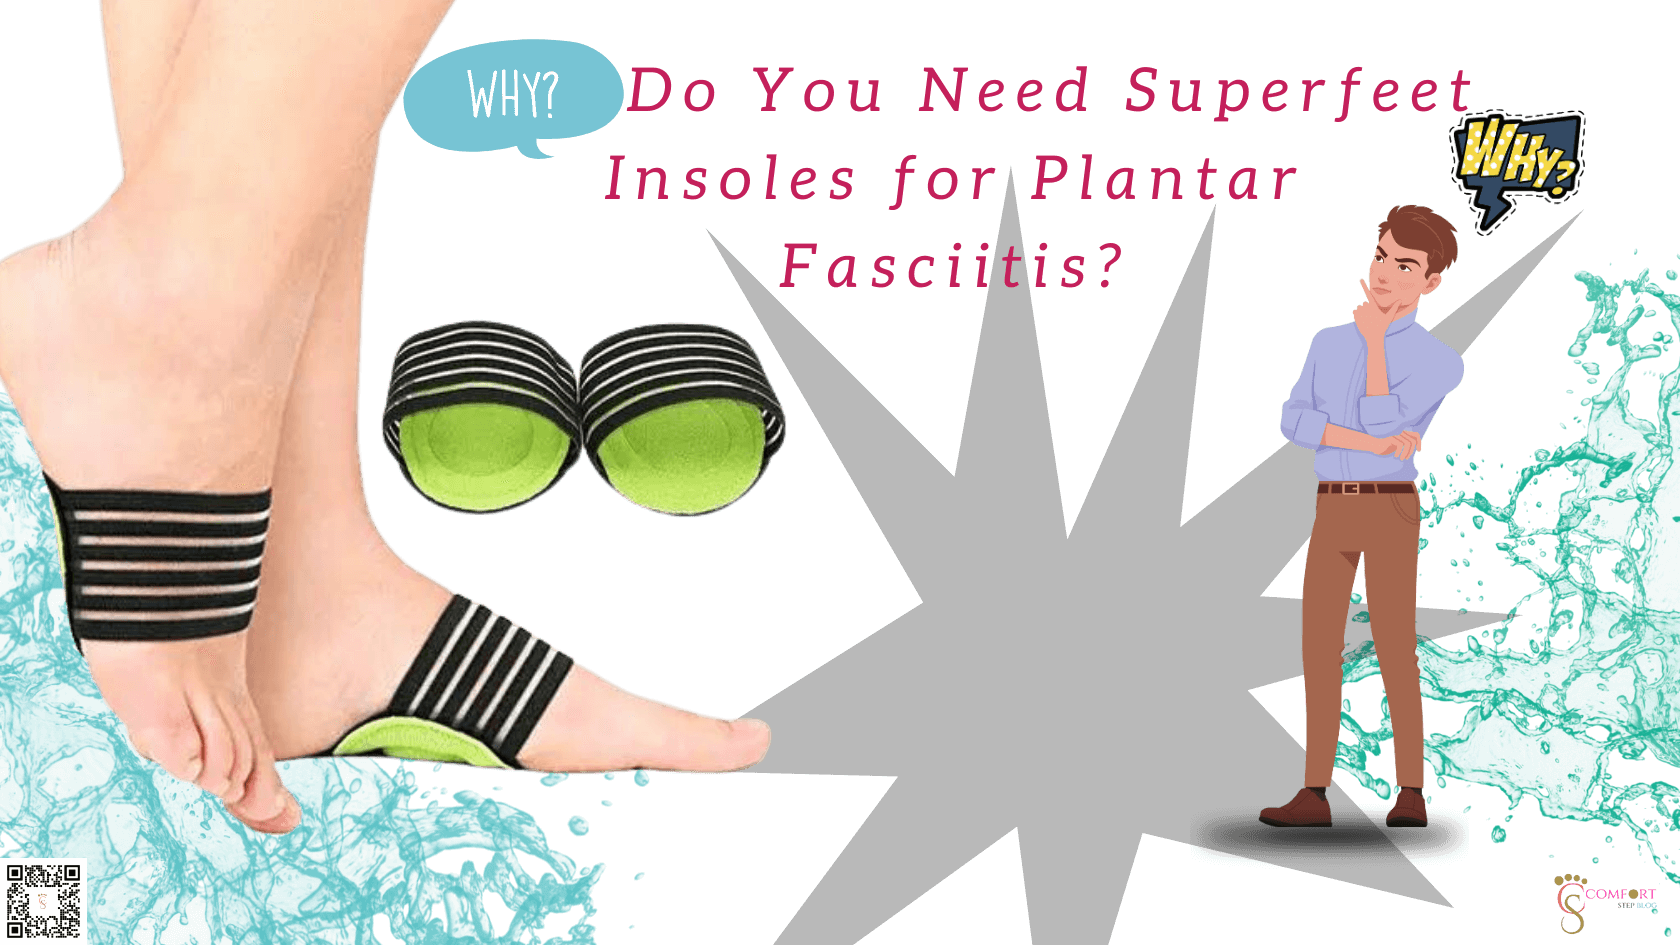 Why Do You Need Superfeet Insoles for Plantar Fasciitis?